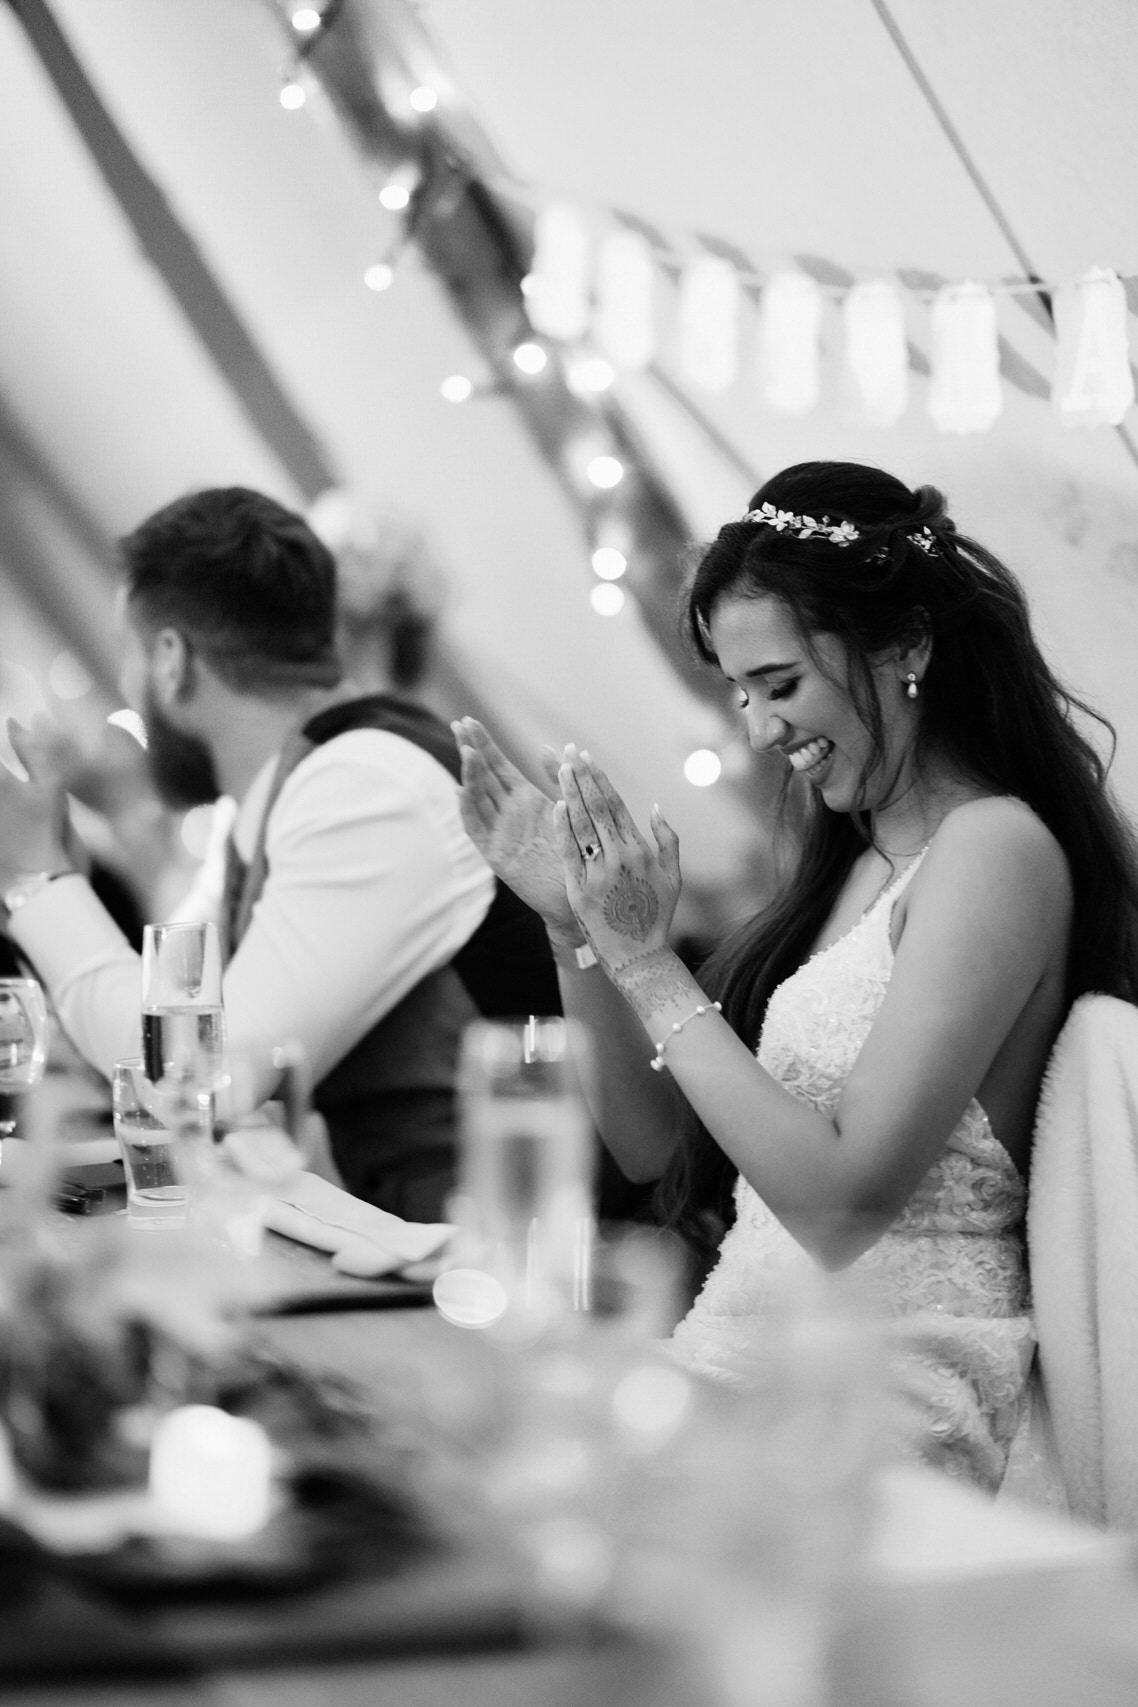 A couple applauding at their wedding party.